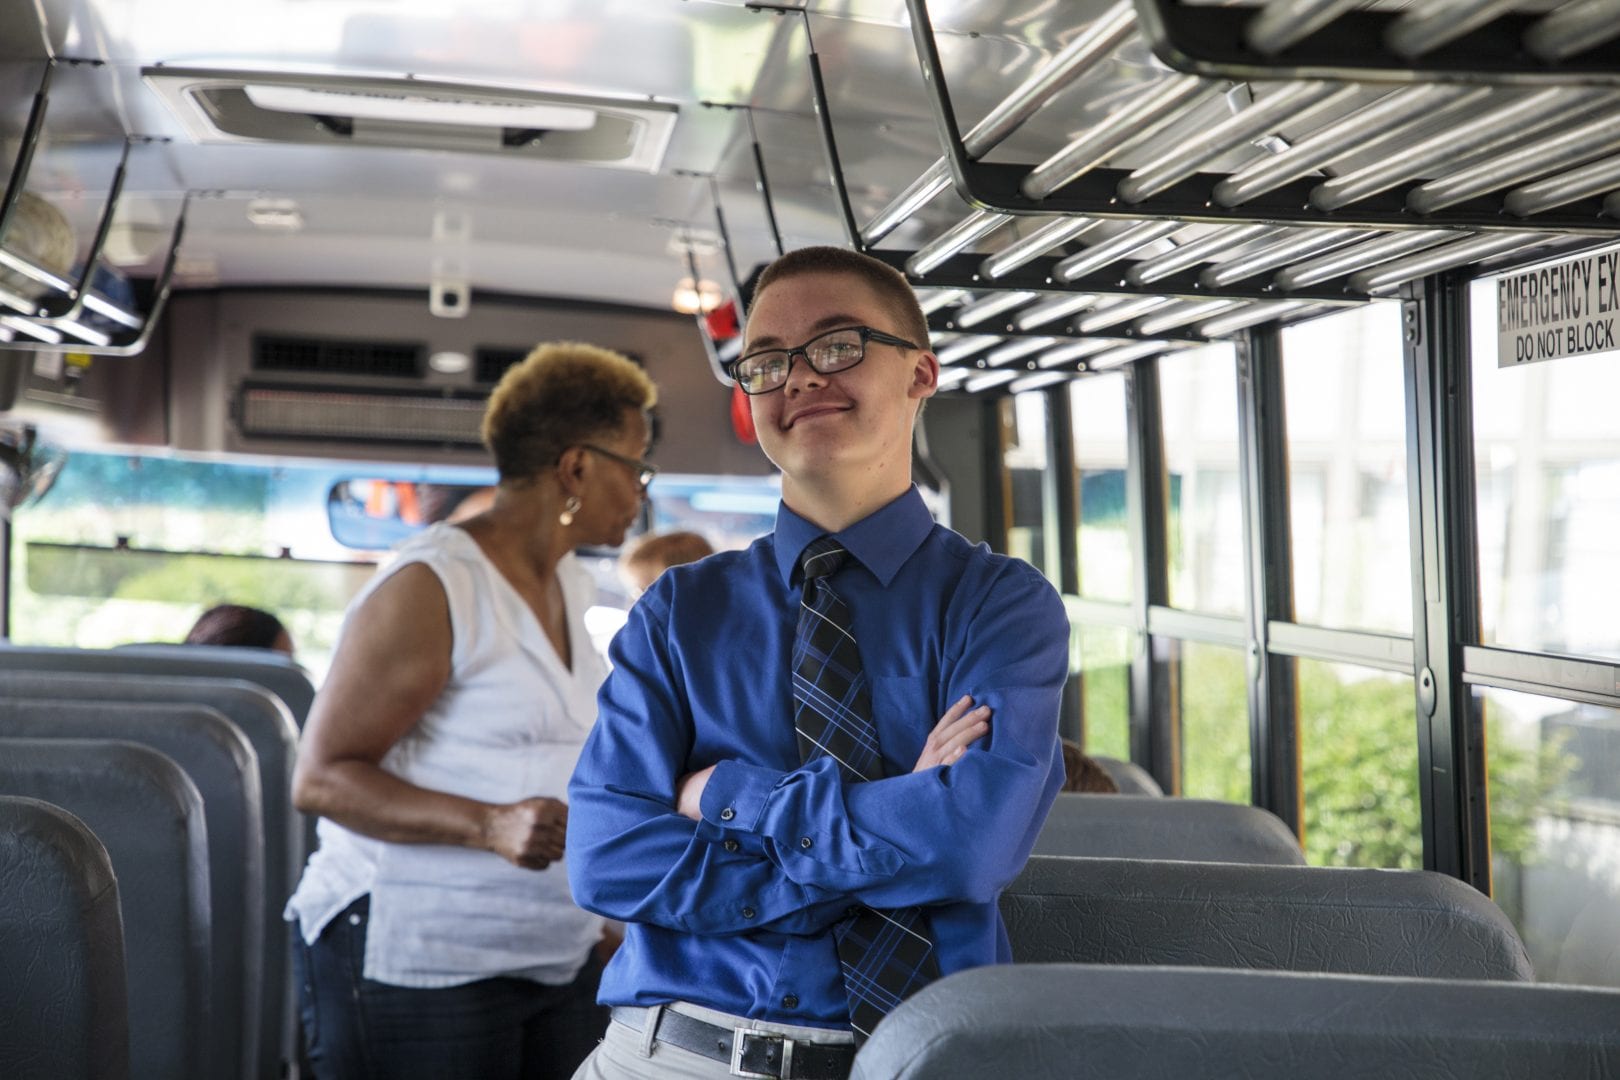 a boy on a school bus in a button up shirt and tie. His arms are crossed confidently.